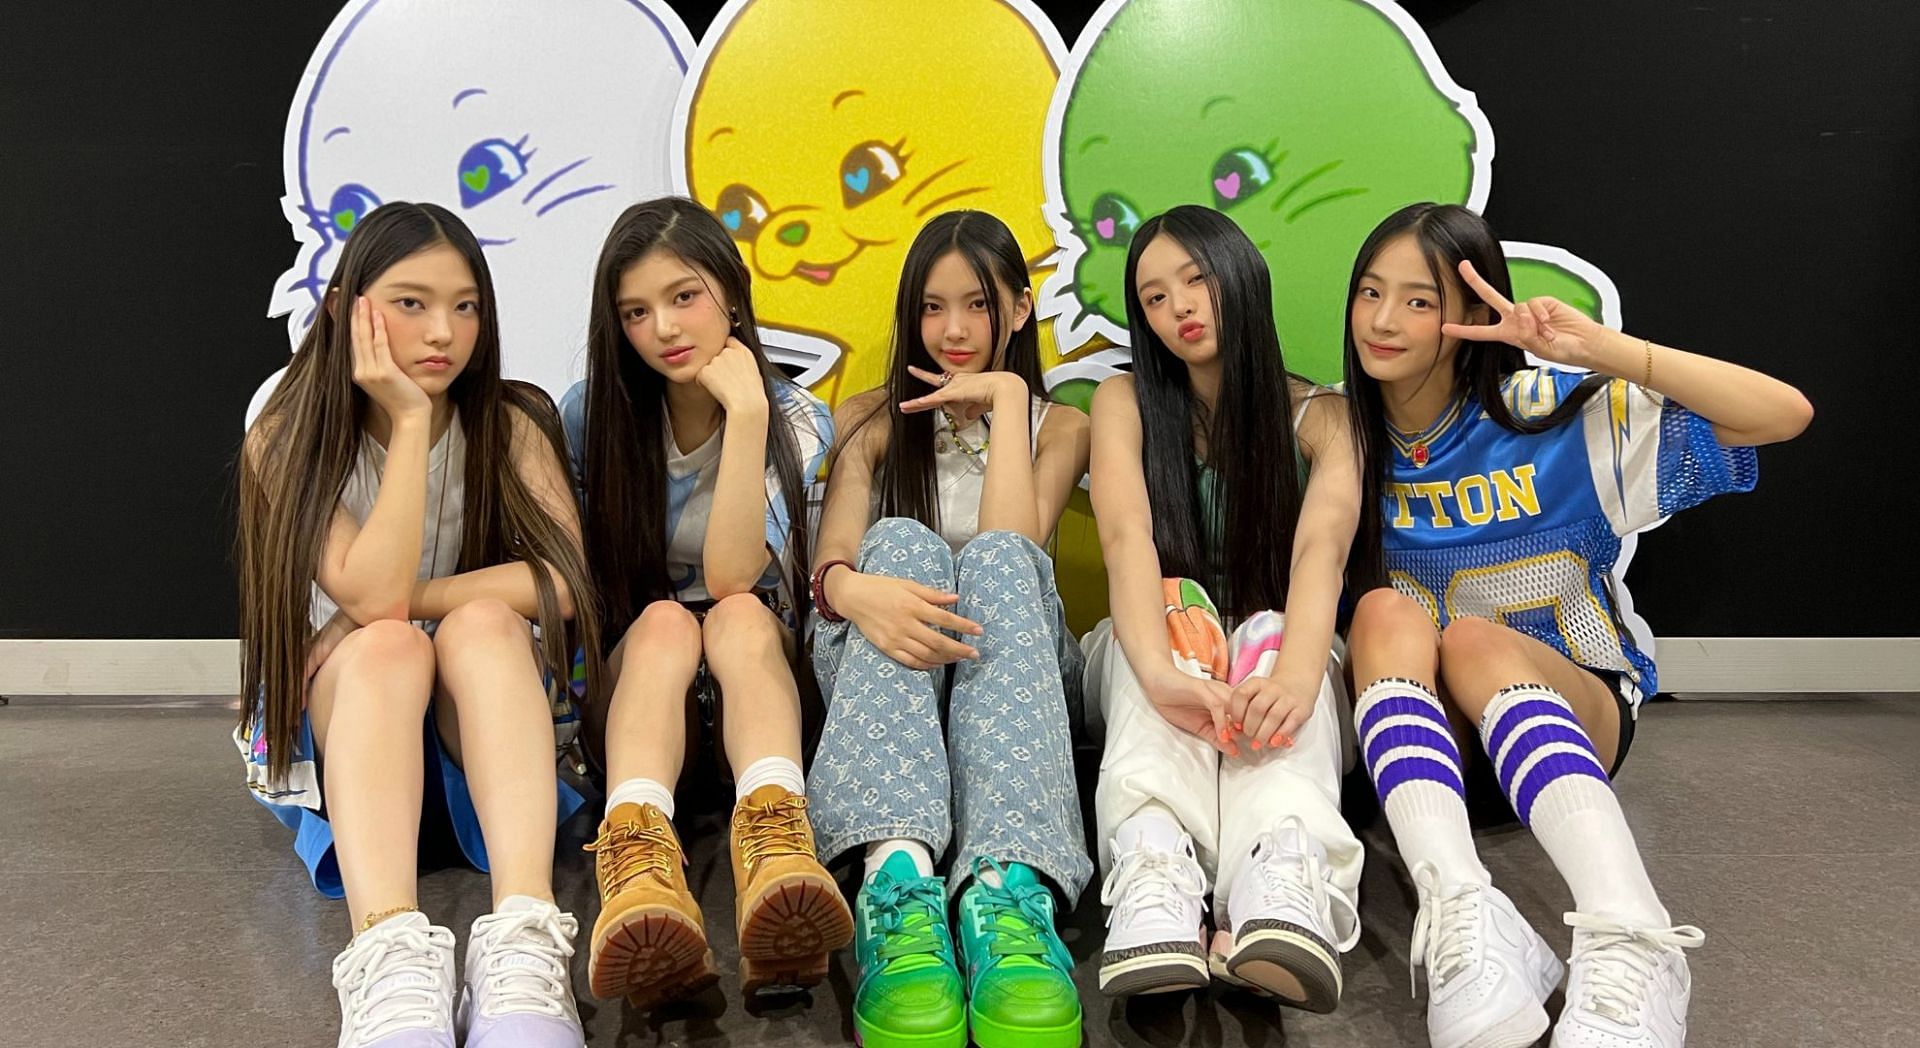 K-pop girl group NewJeans sells over 310,000 copies of EP 'New